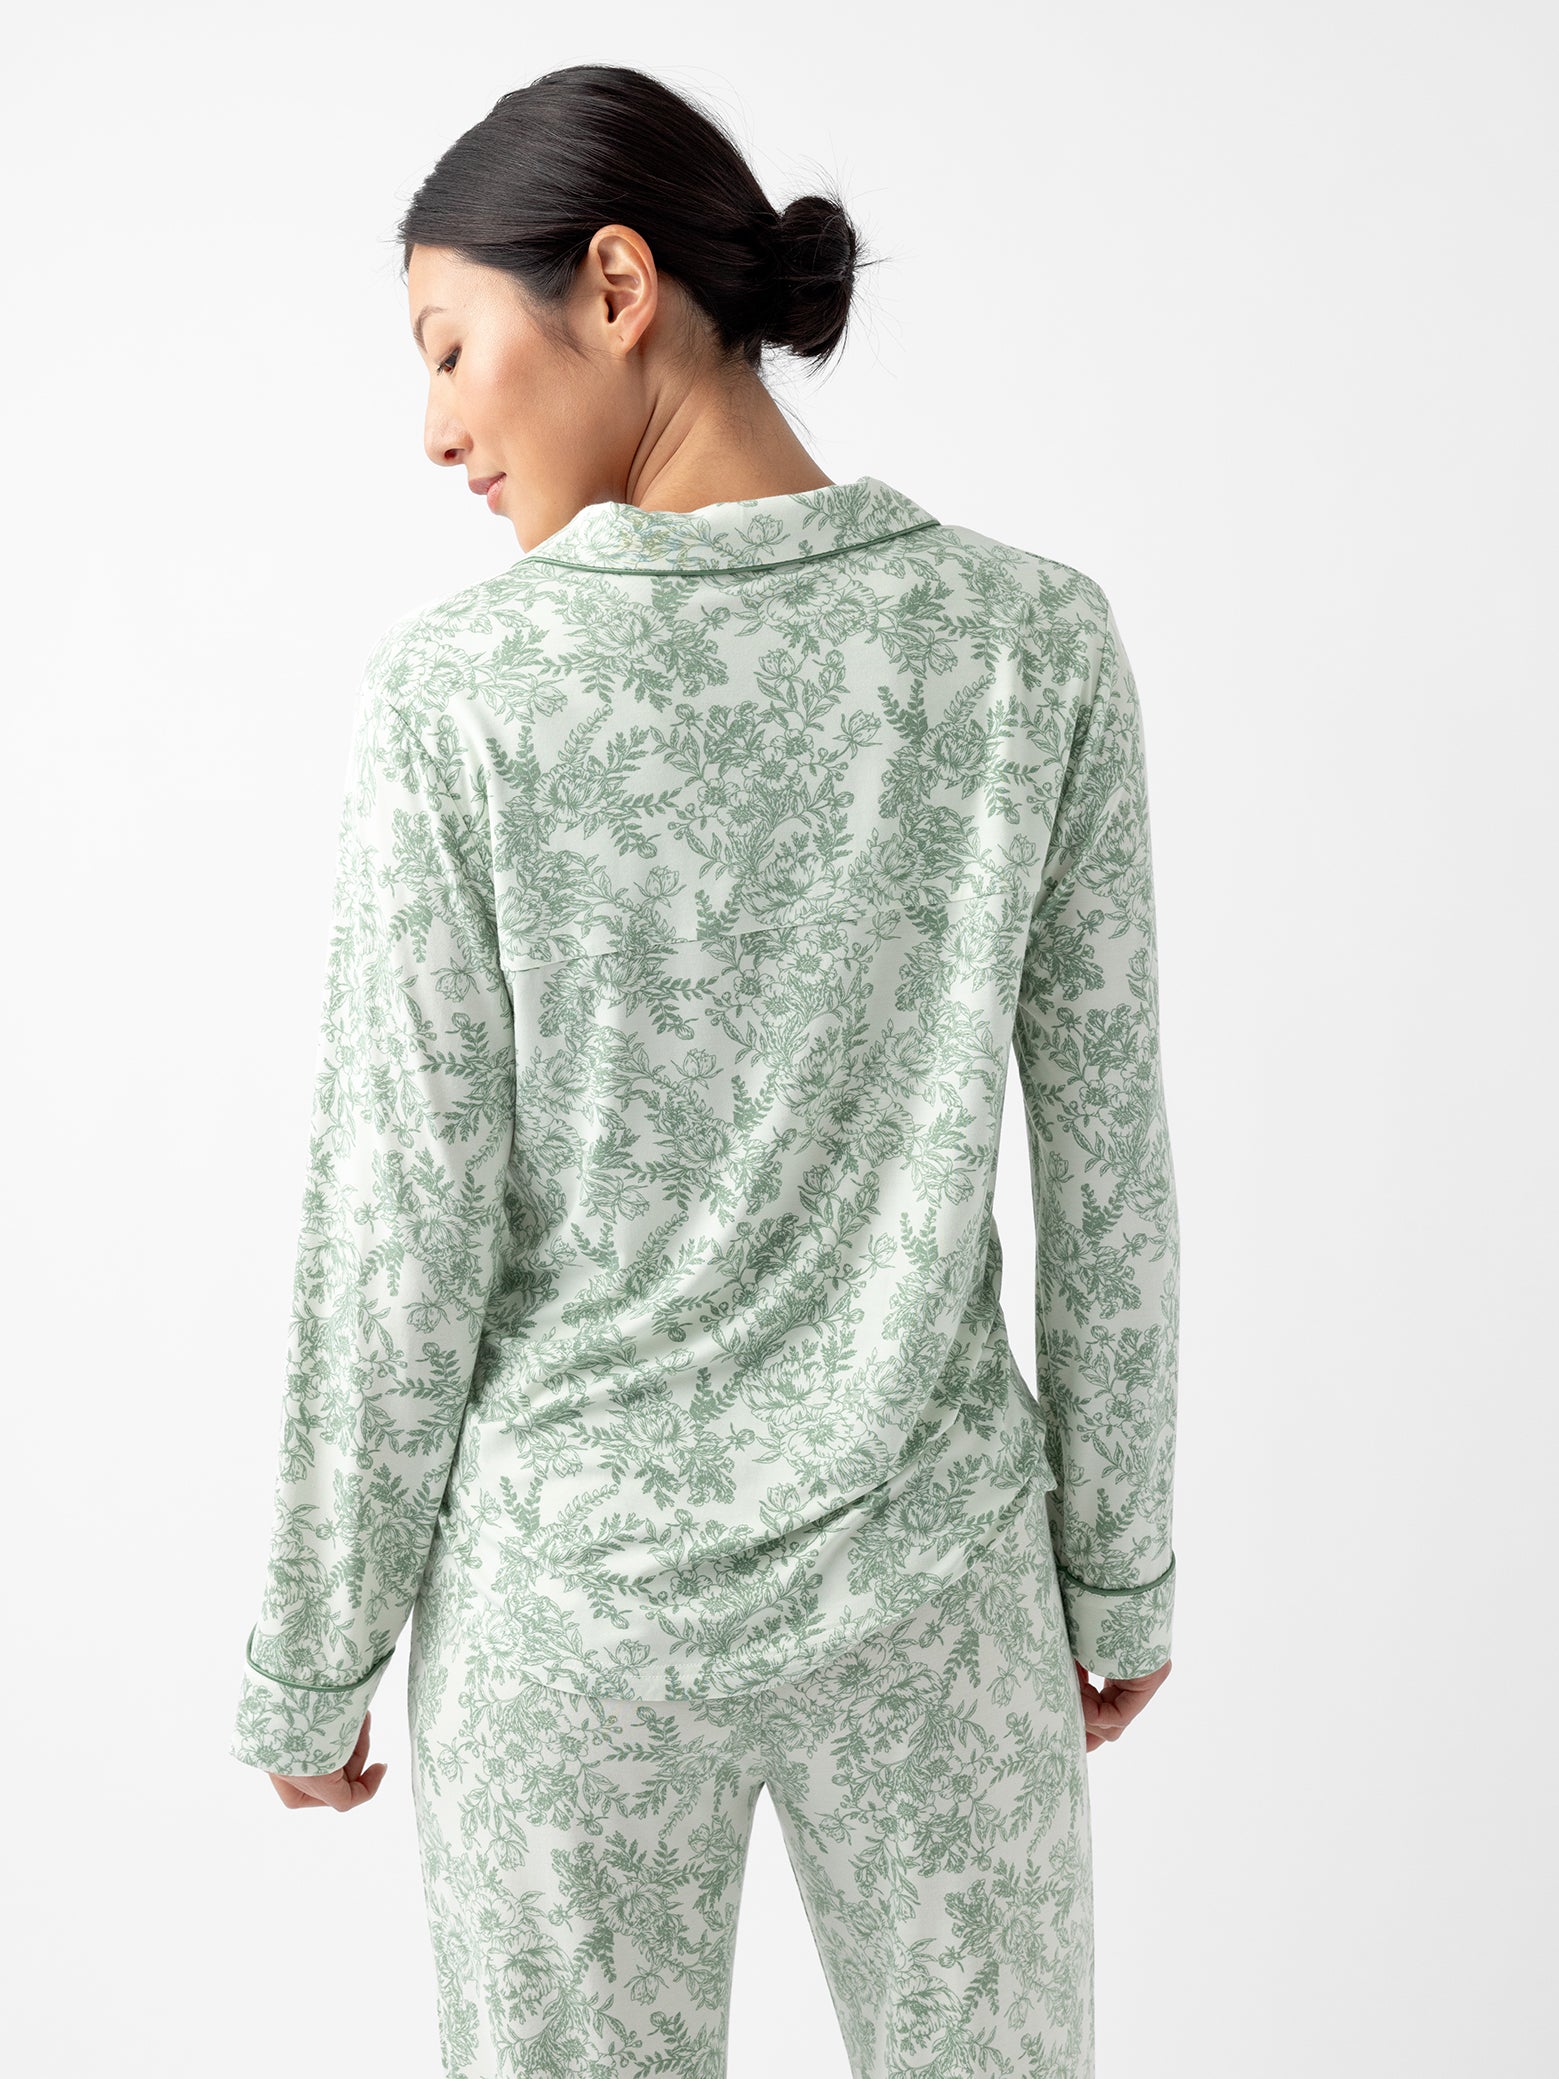 Back of woman in celadon toile pajama top 